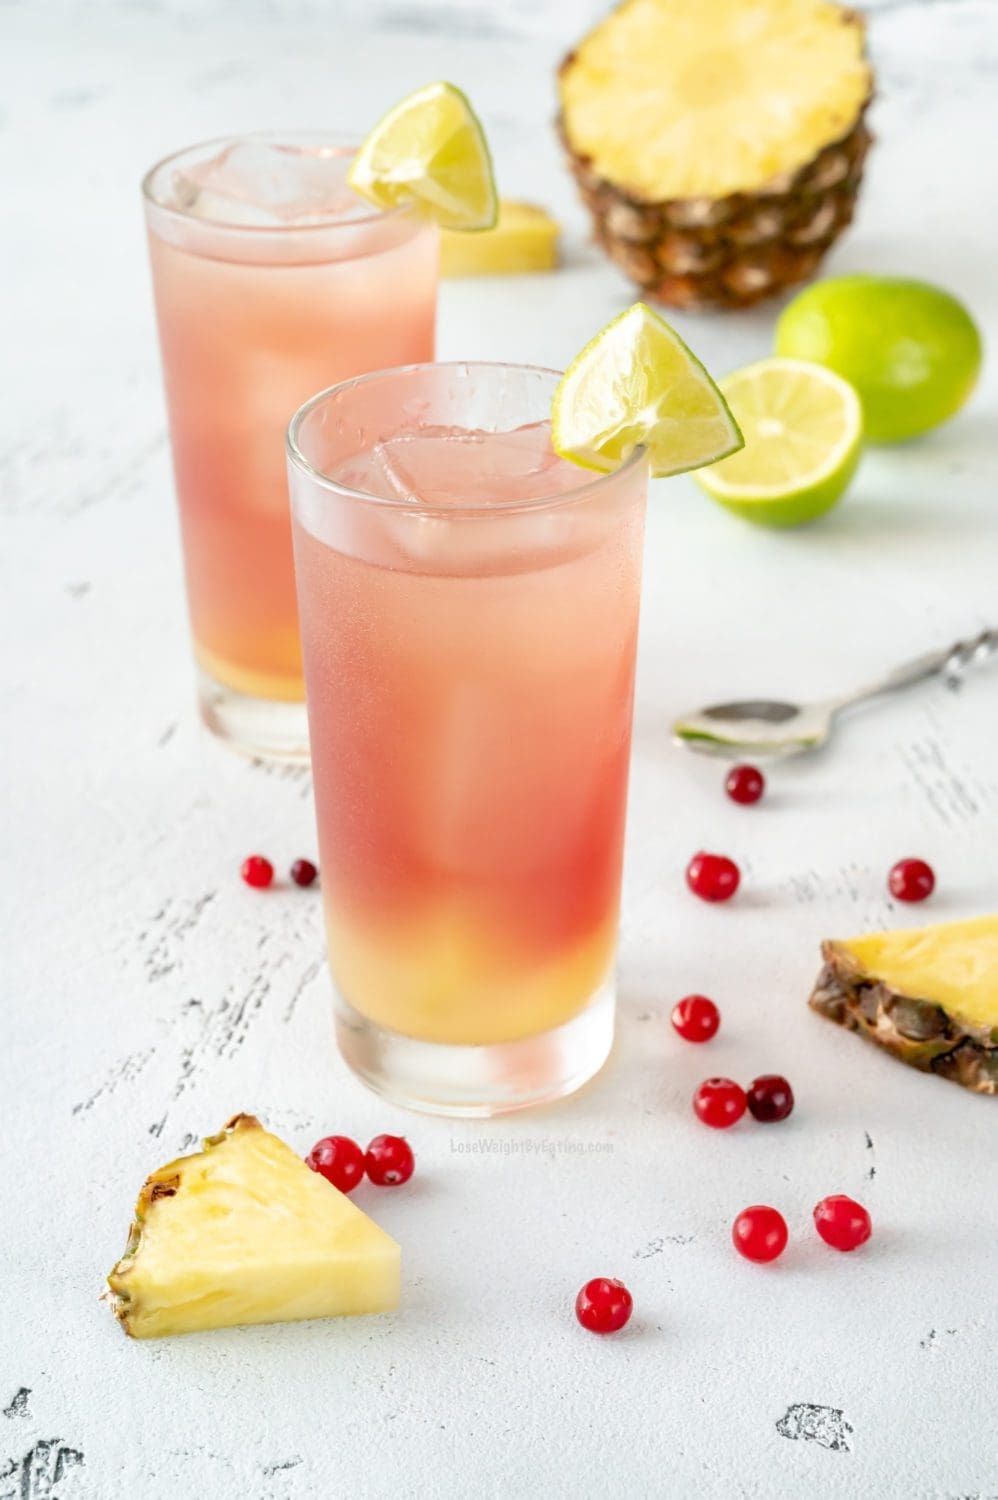 Cranberry Pineapple Weight Loss Juice